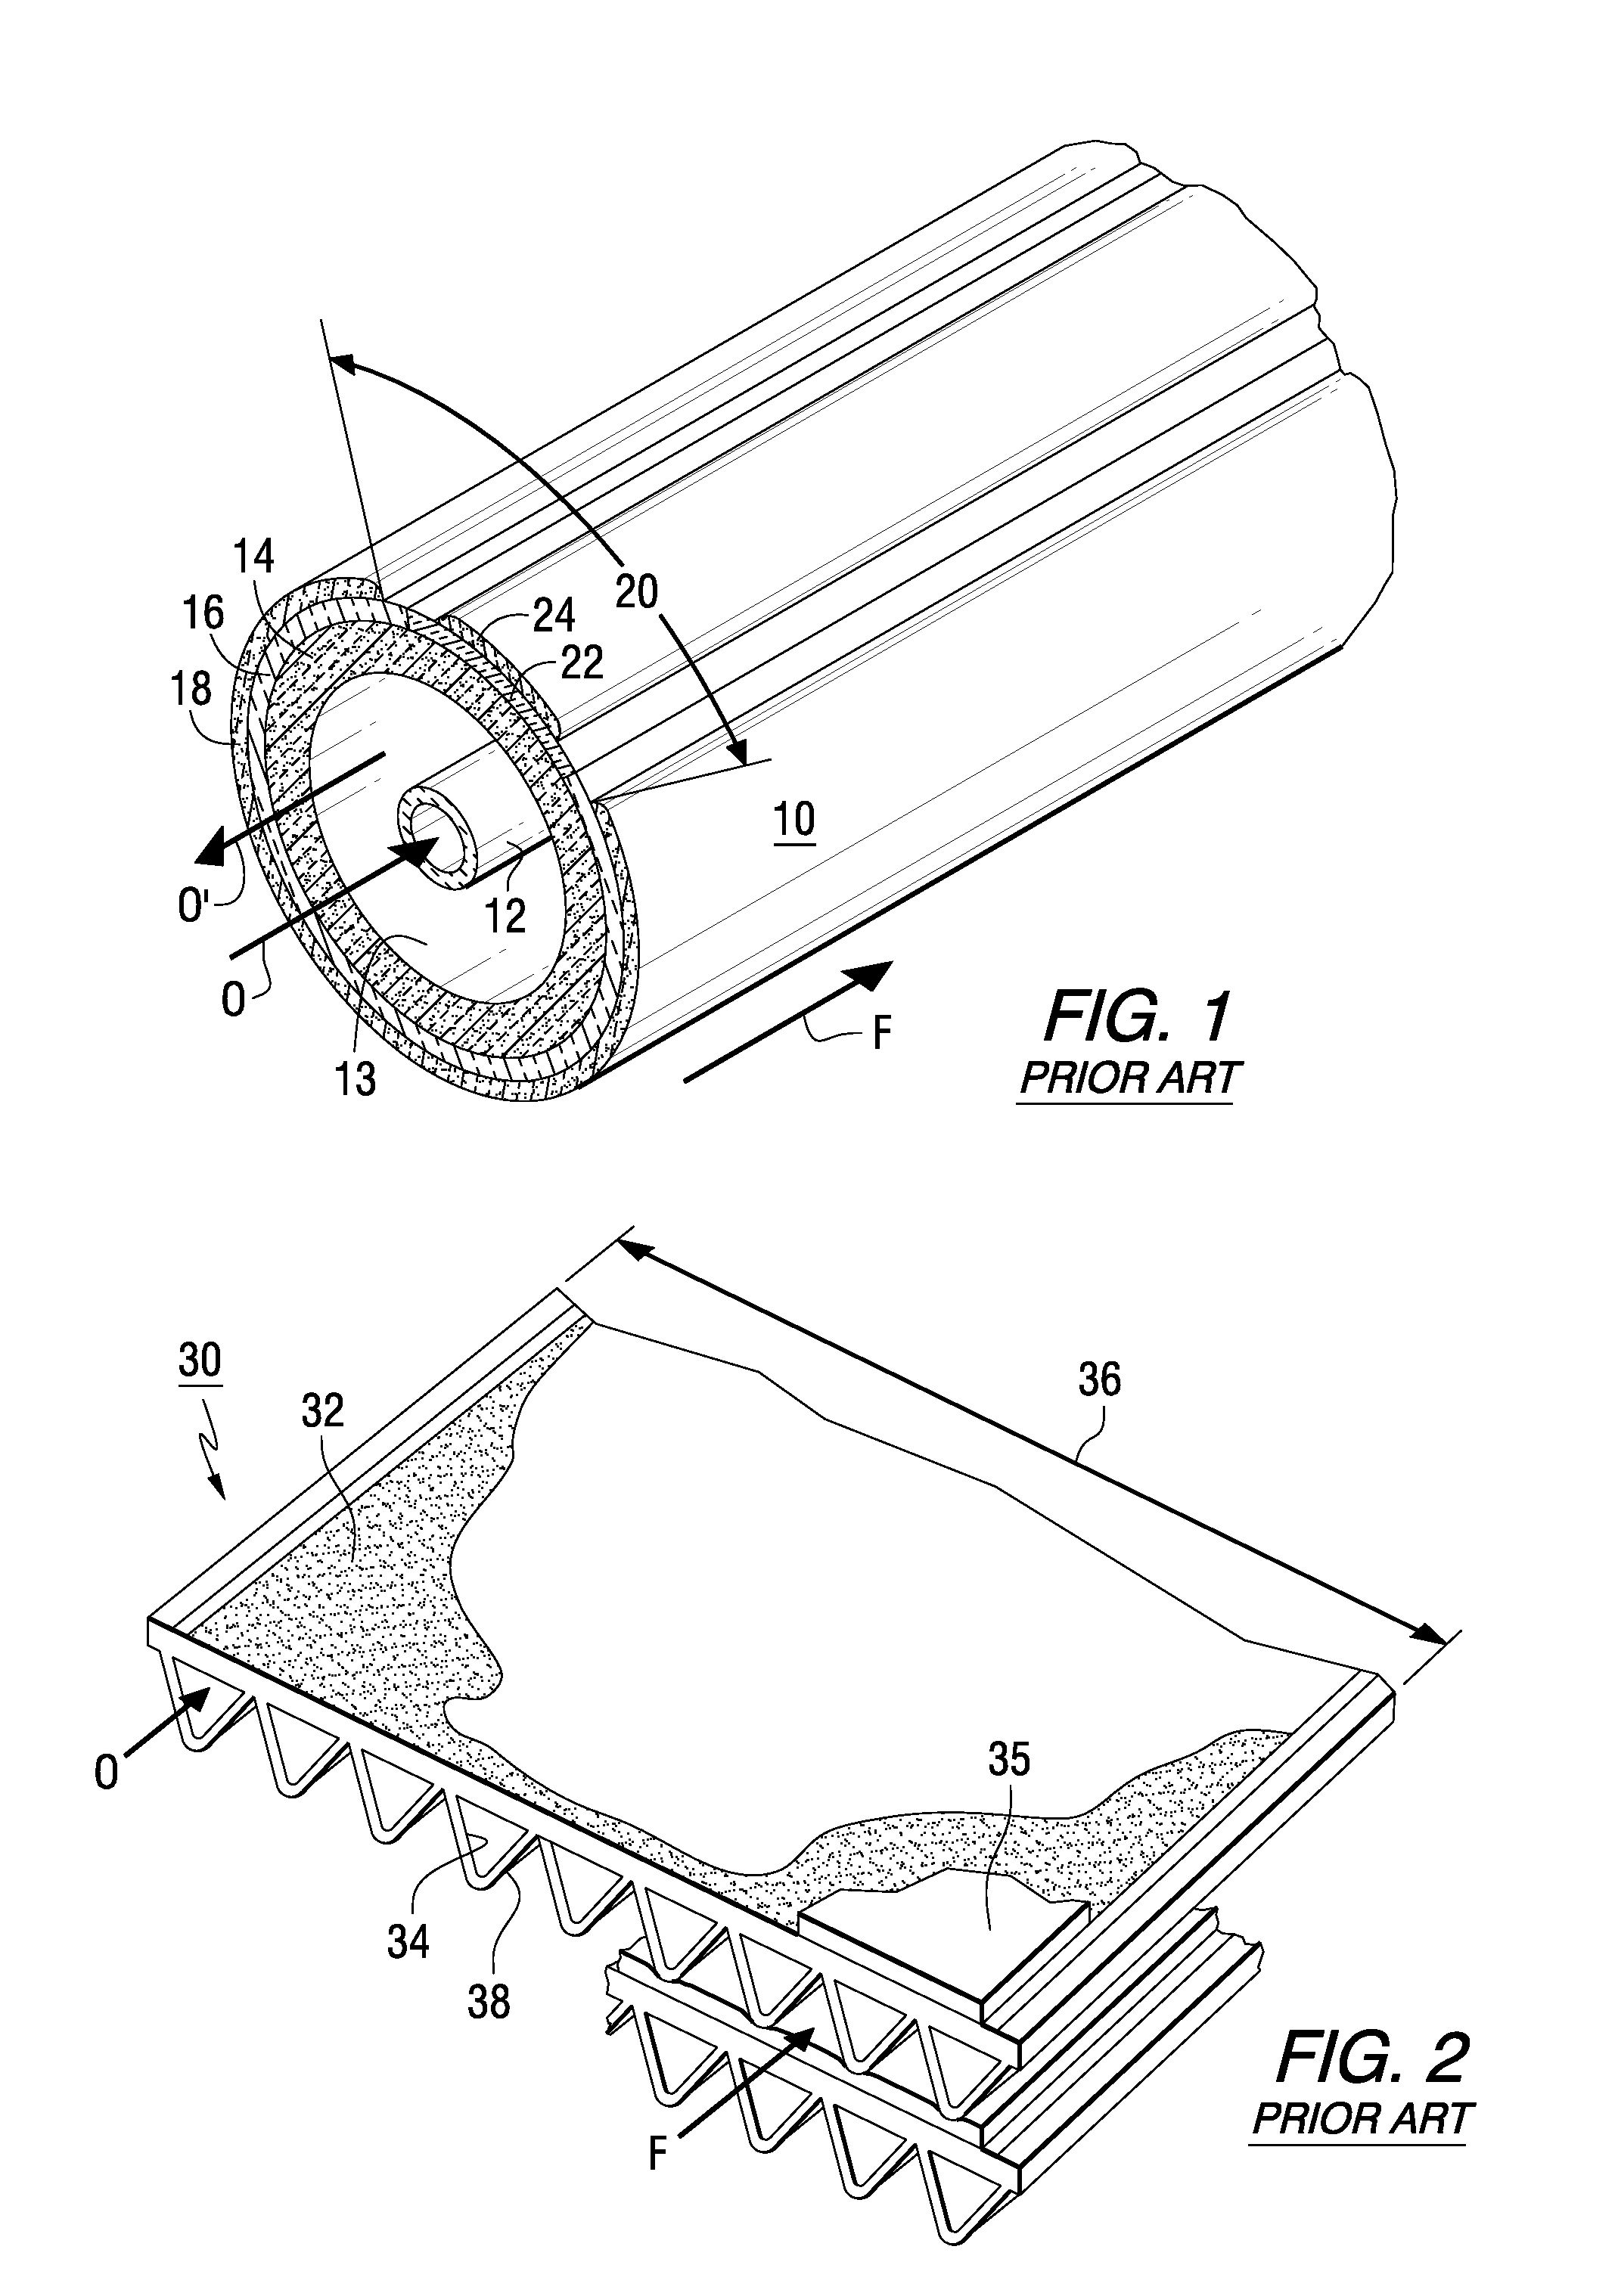 Bi Containing Solid Oxide Fuel Cell System With Improved Performance and Reduced Manufacturing Costs